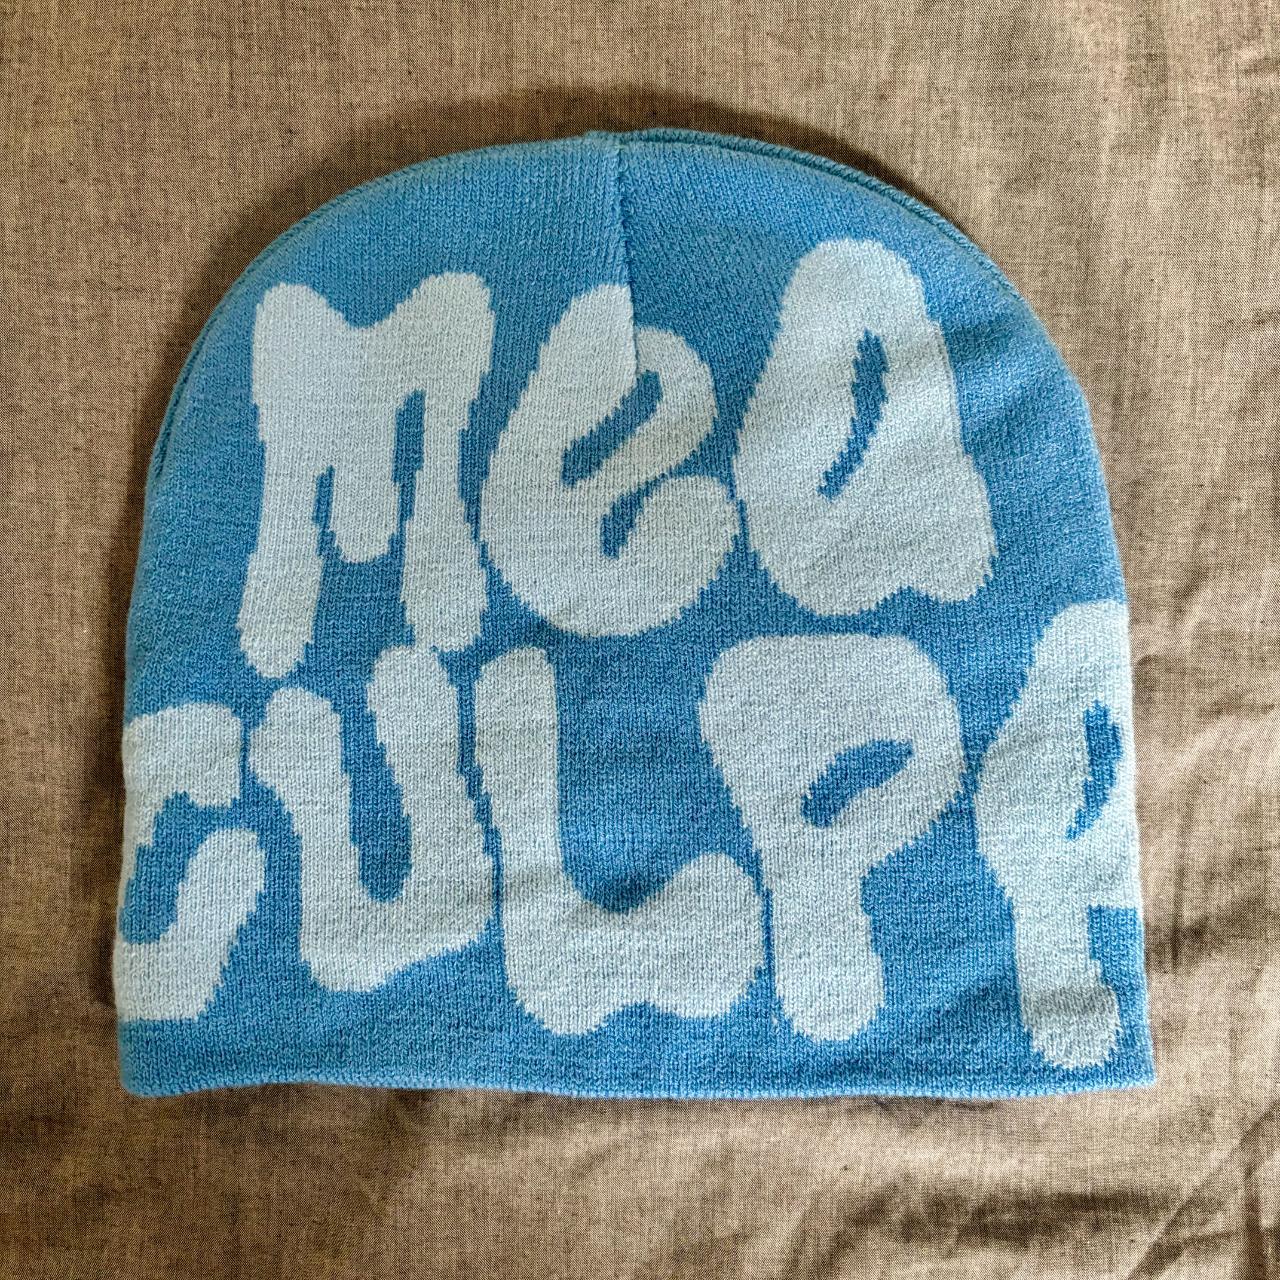 Mea culpa hats. They all come in together. - Depop